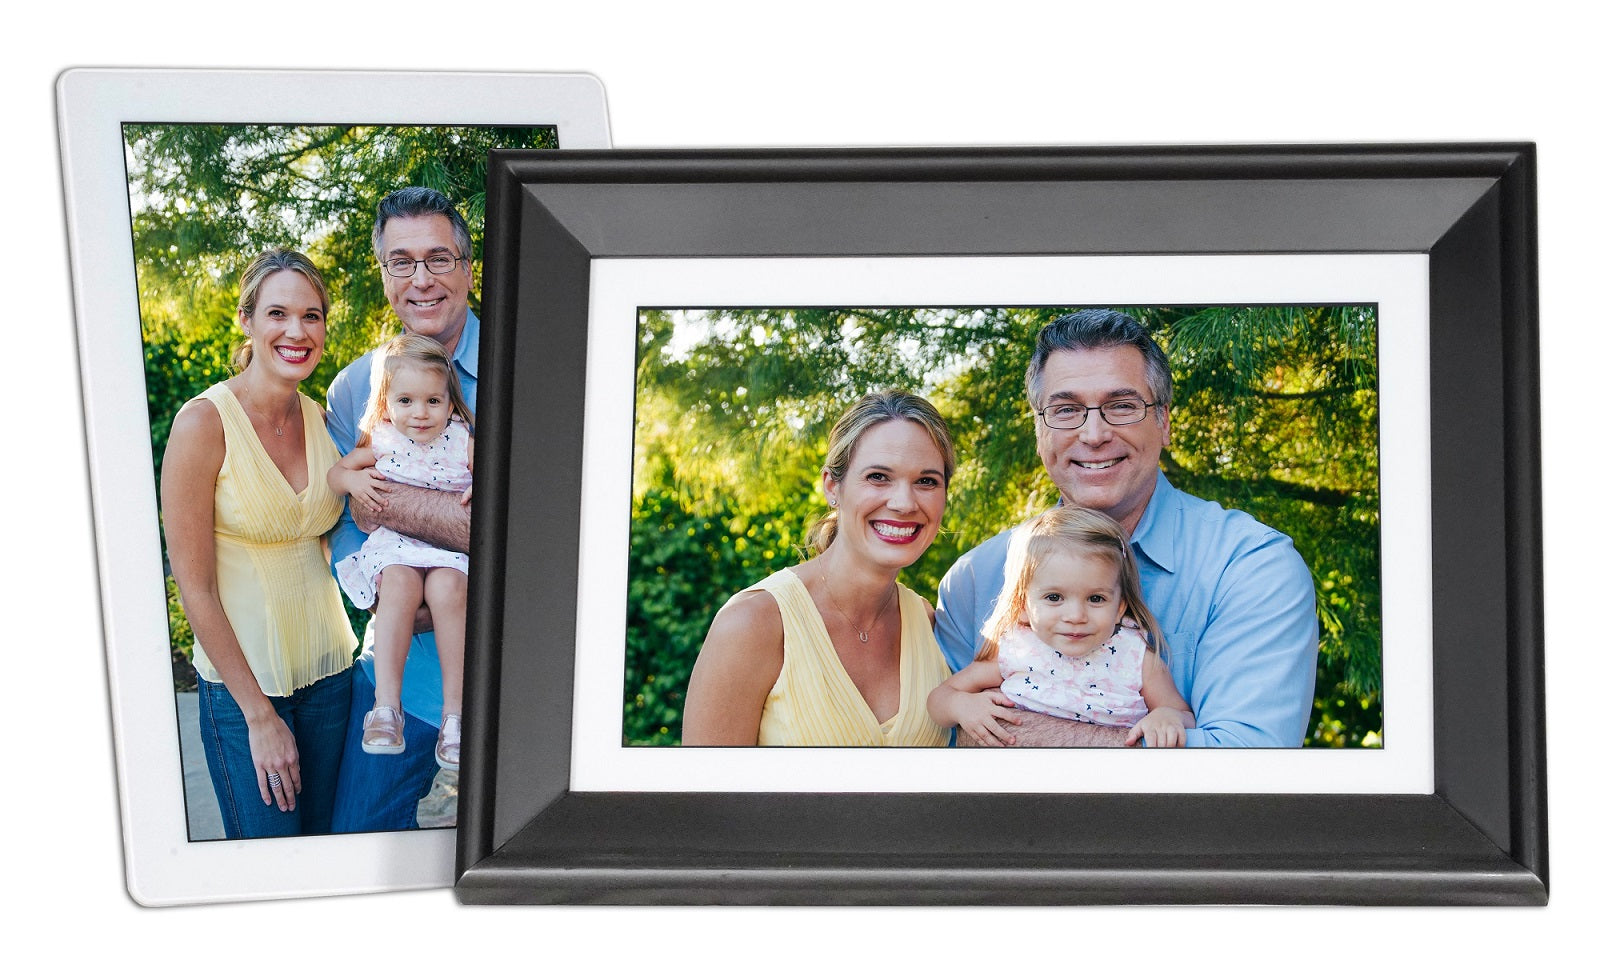 PhotoSpring Standard 10in Wifi Picture Frames